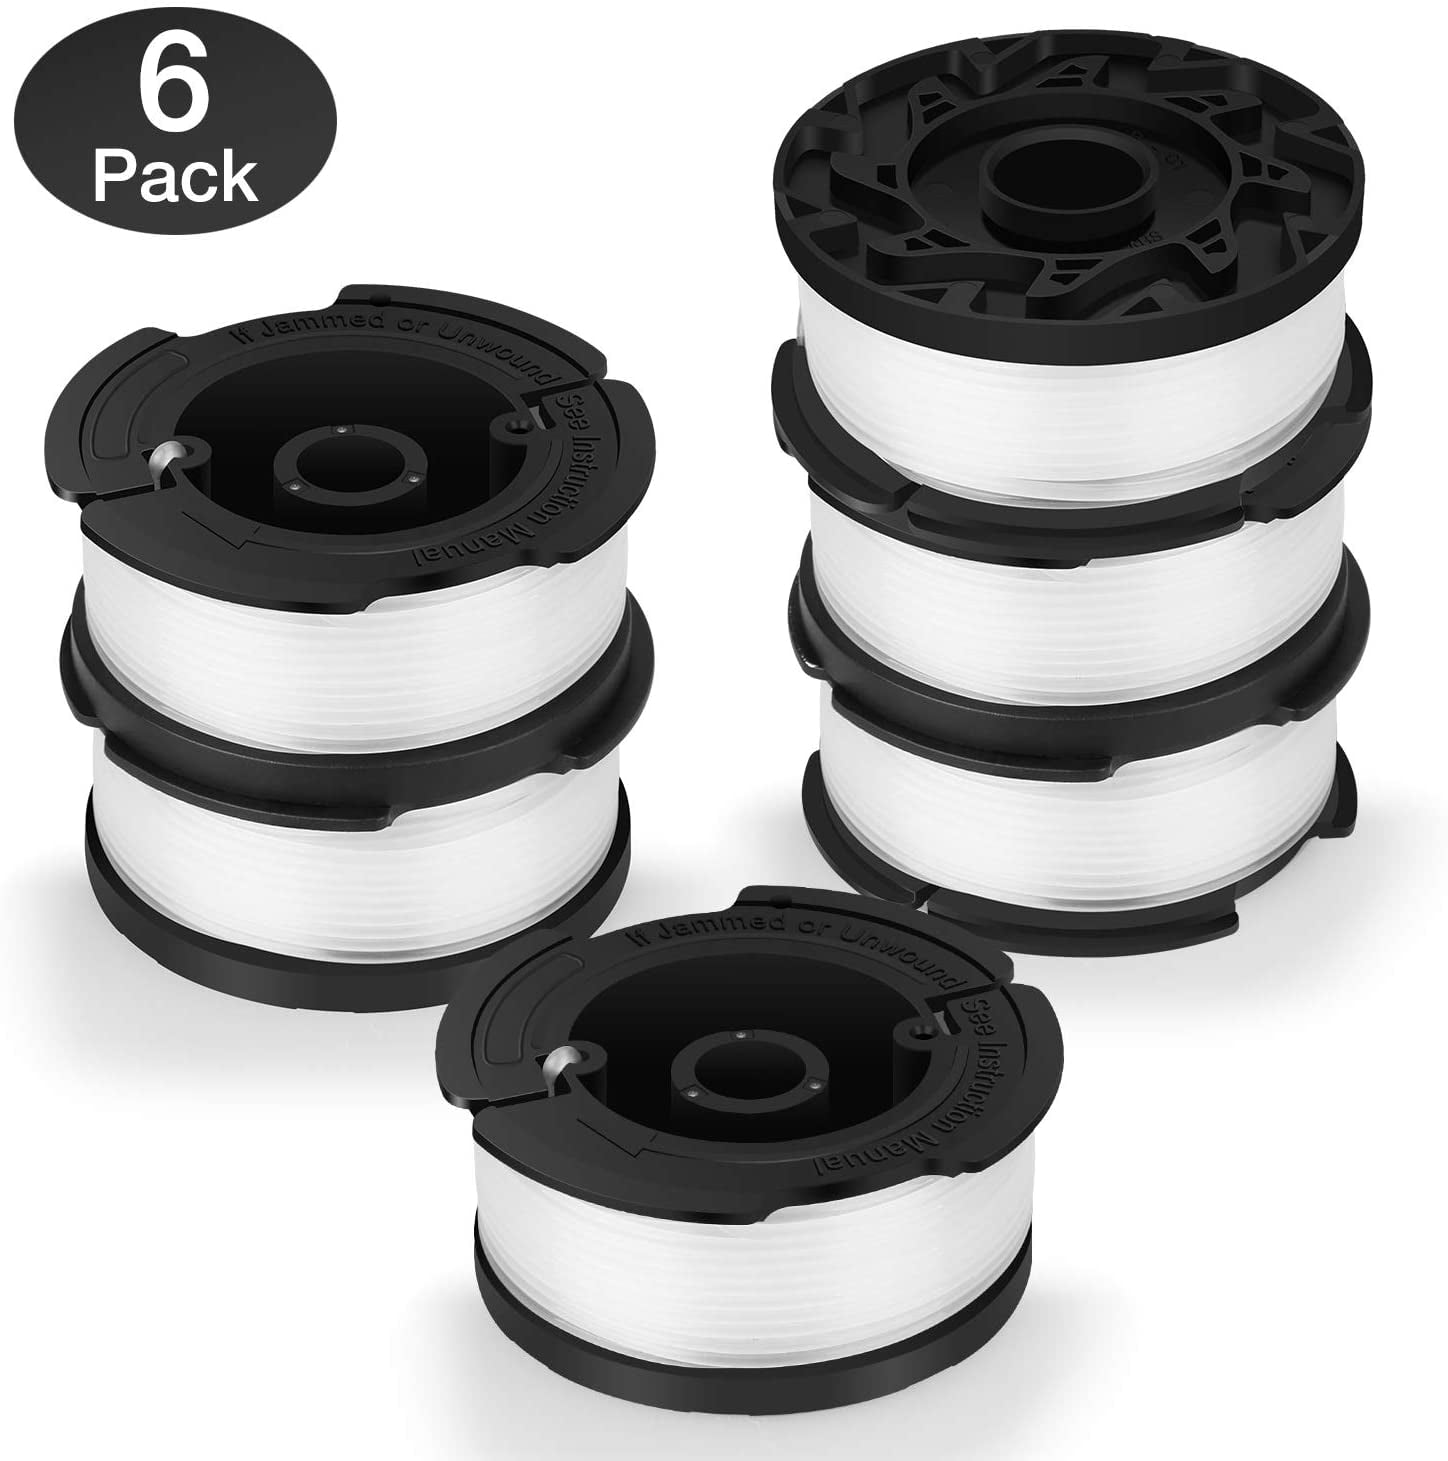 6 Packs Green Box Innovations Line String Trimmer Replacement Spool for Superior Design with Automatic Feed System 30ft and 0.065-inch Black+Decker AF-100